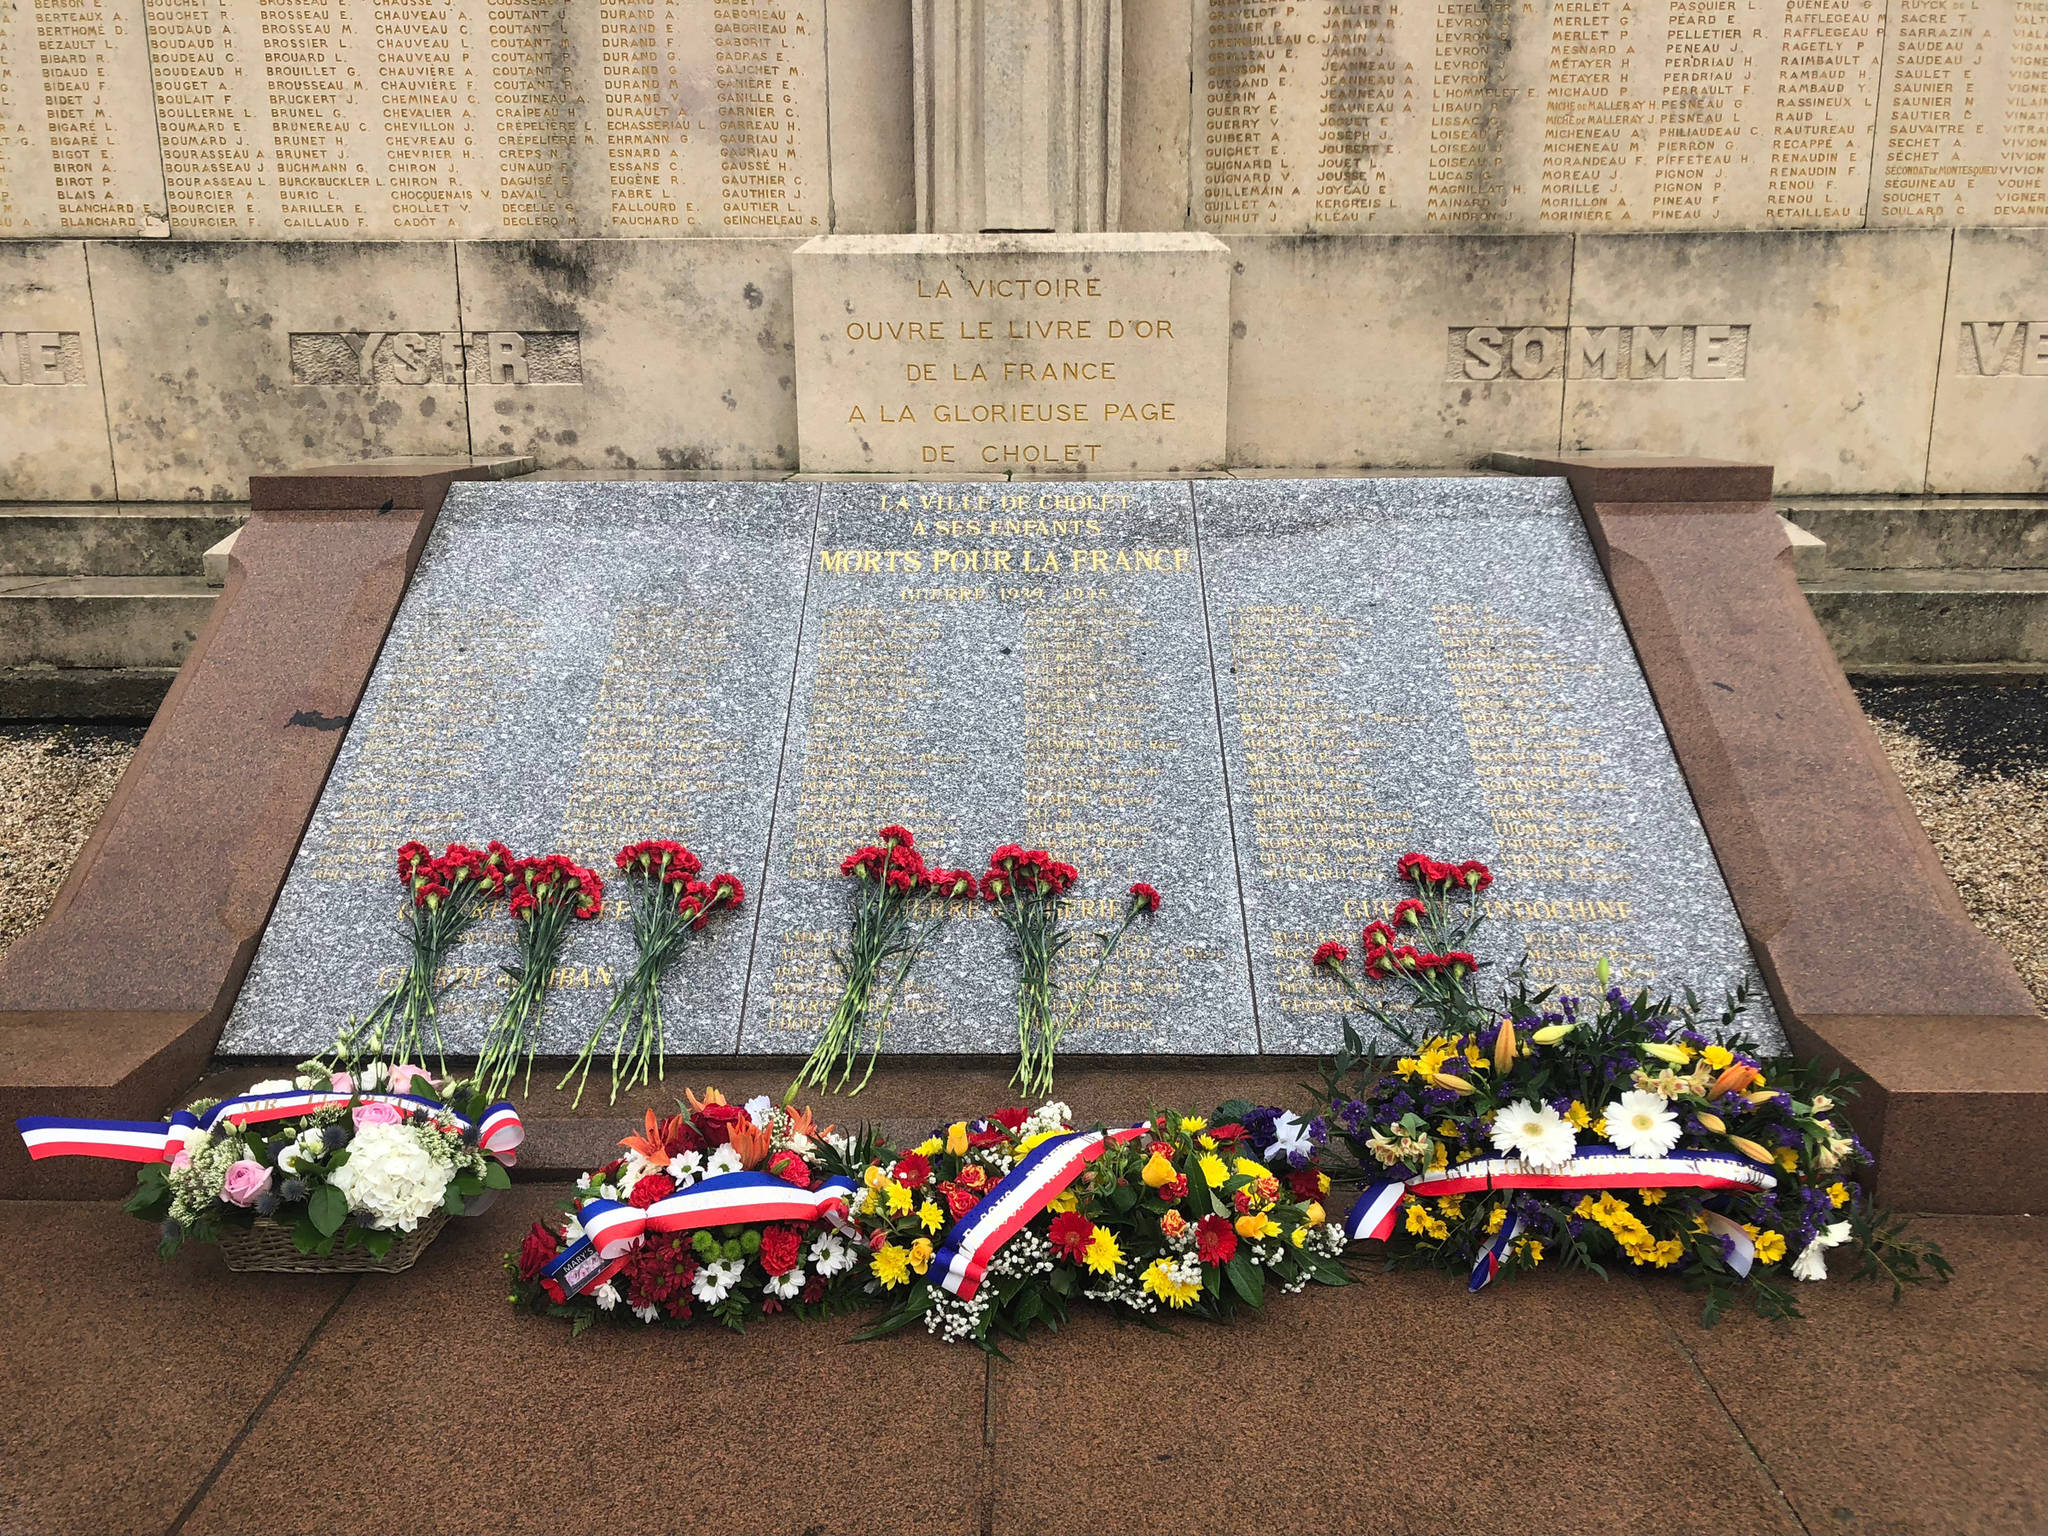 Flowers placed on the “Monument aux Morts” in front of the Gare de Cholet. (Bridget McTague | For the Juneau Empire)